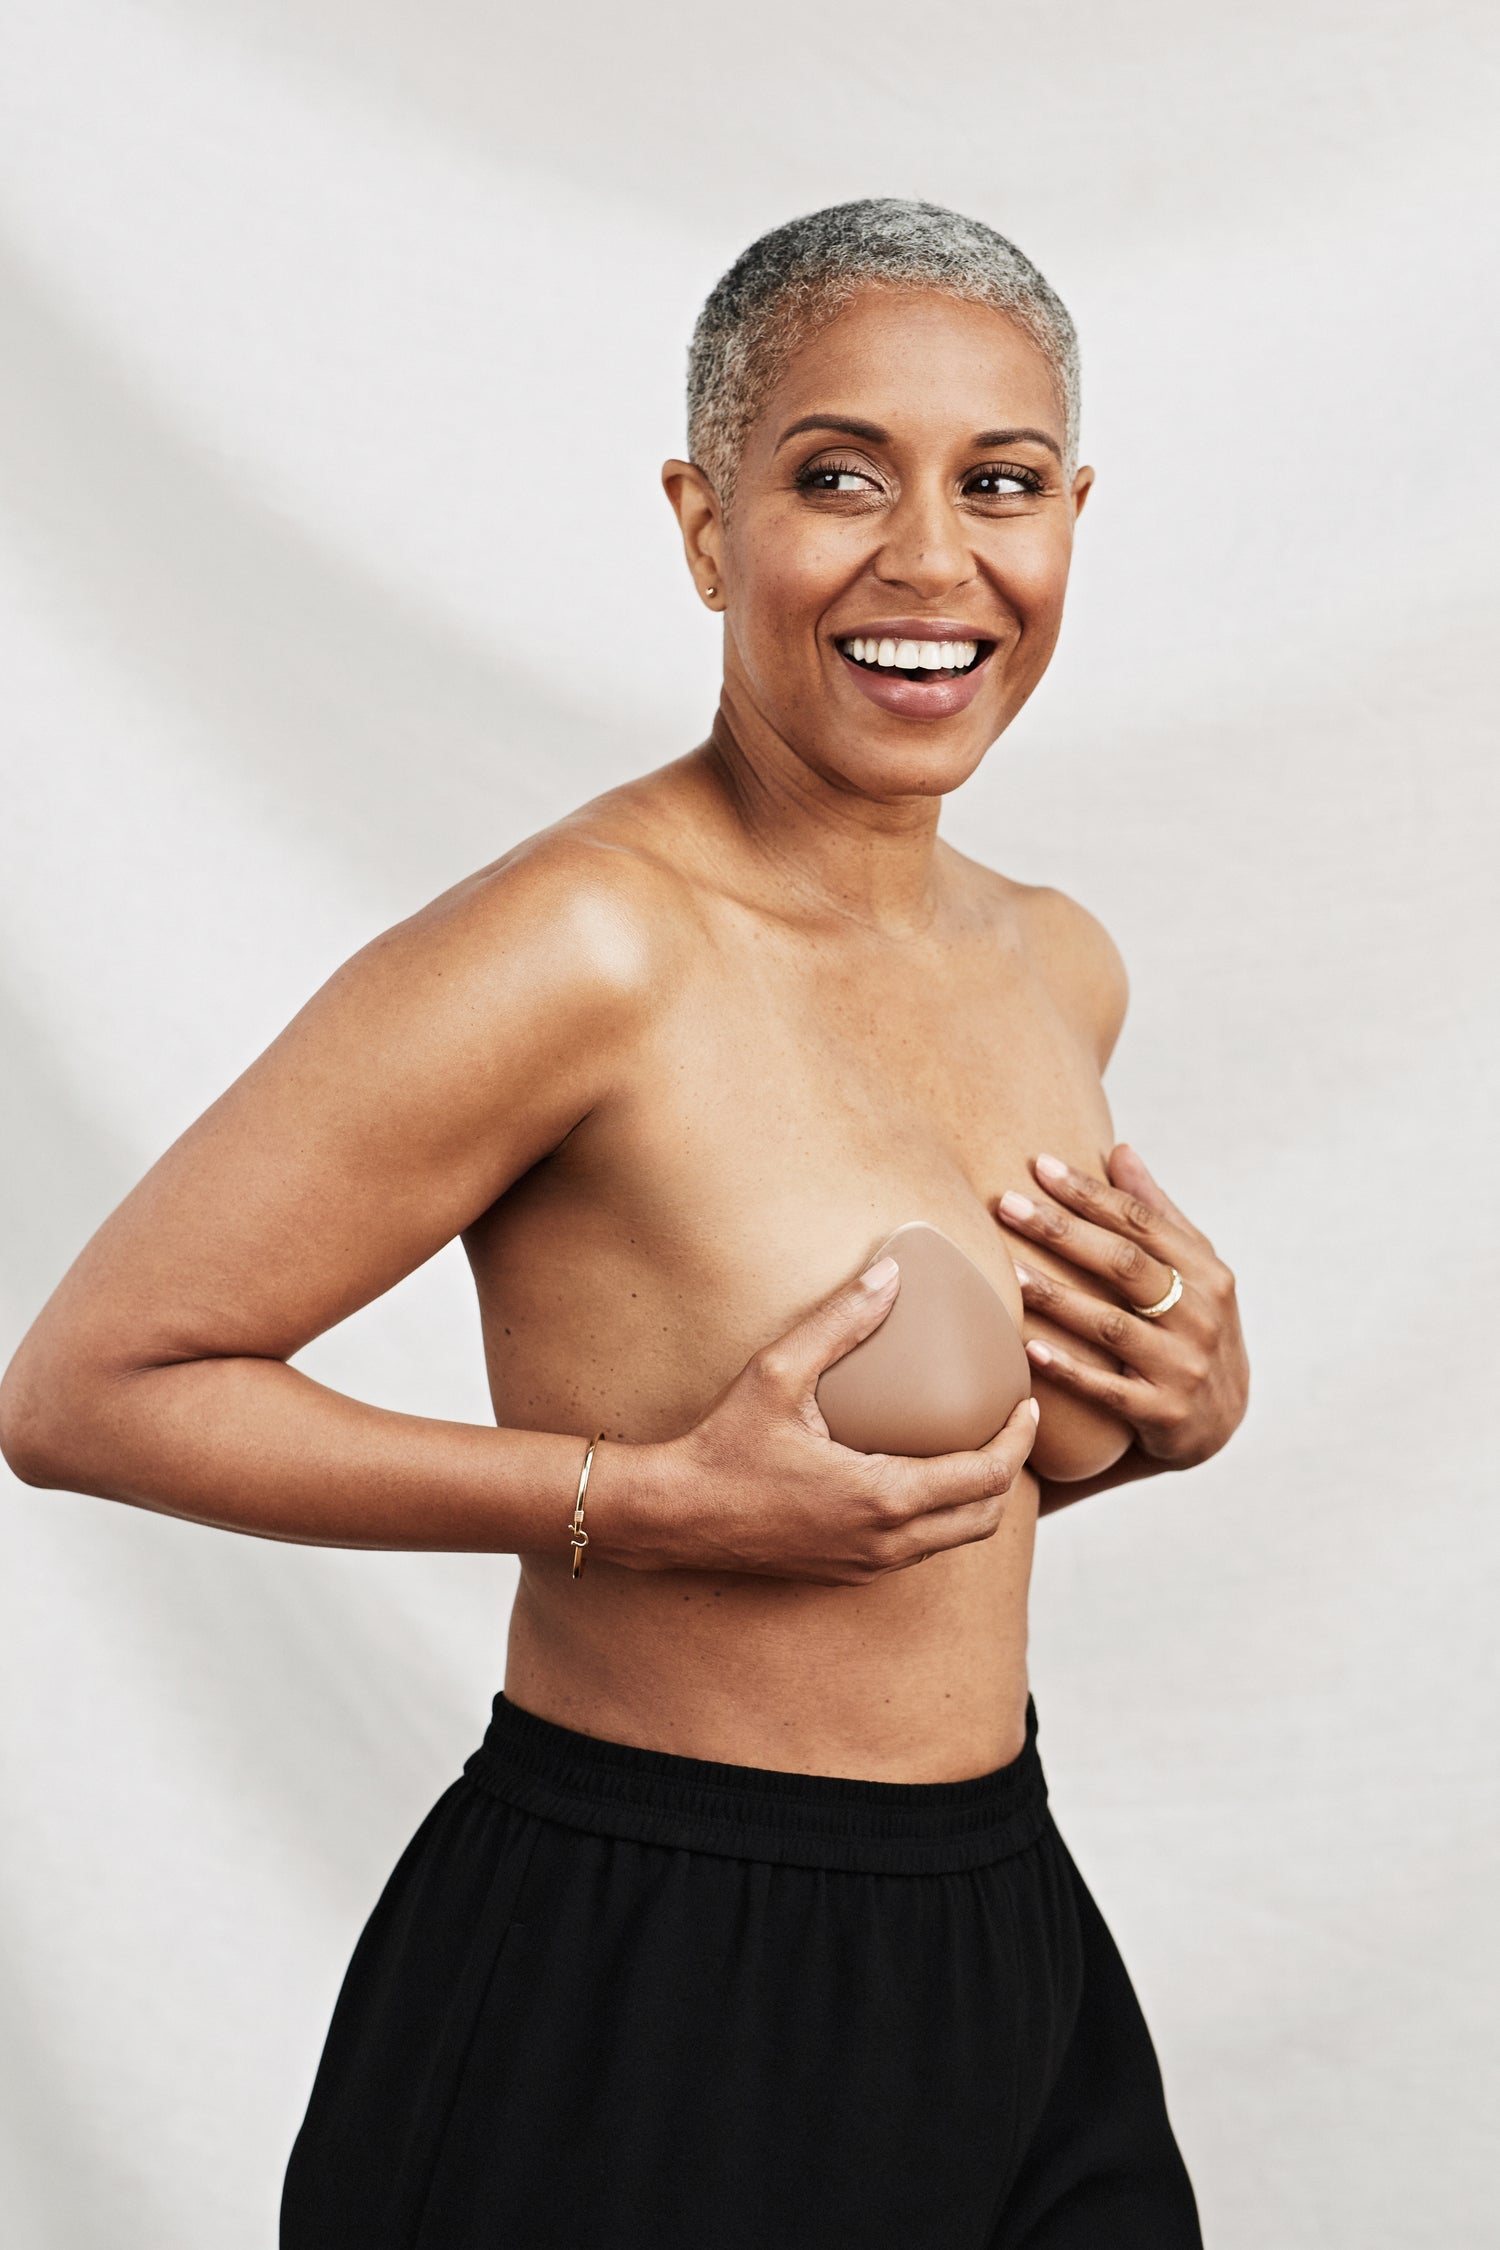 Prostheses and bras after breast cancer surgery 